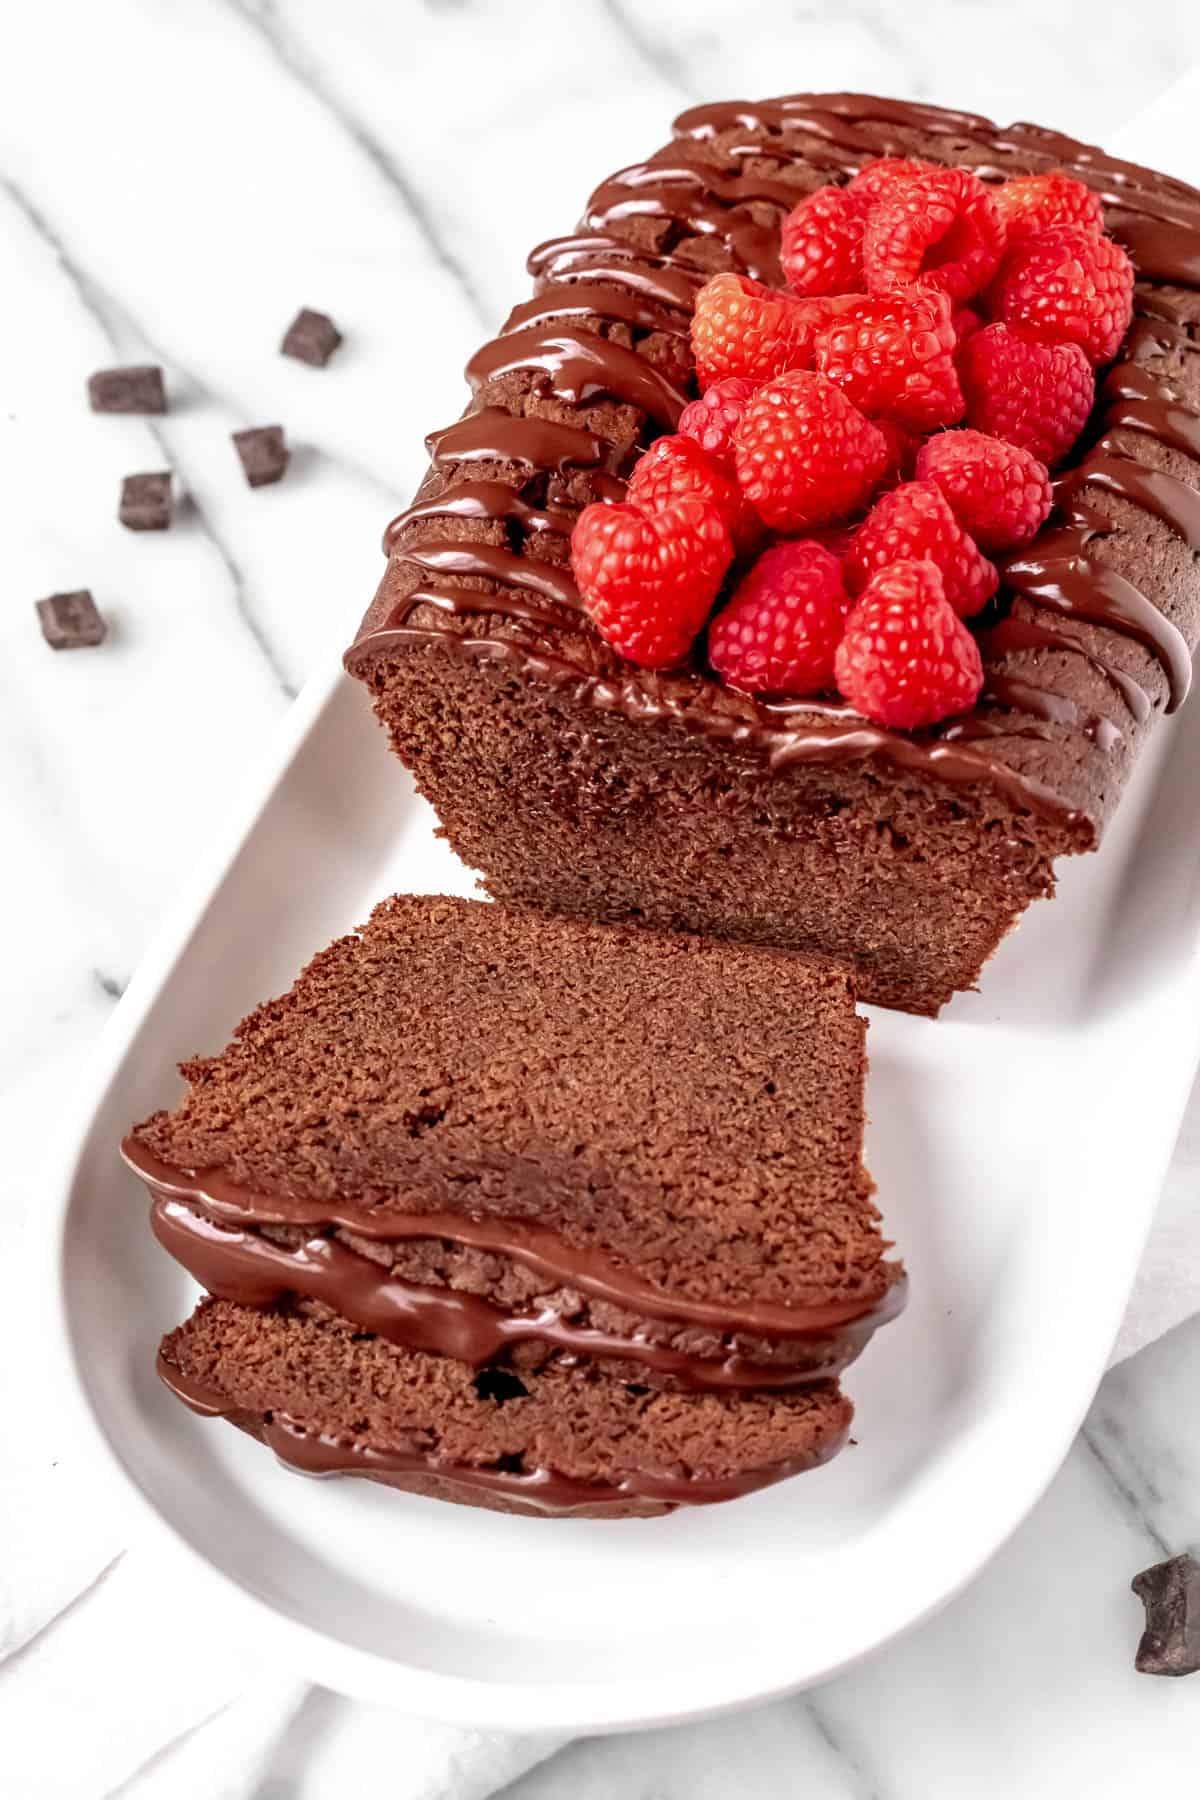 A chocolate pound cake with raspberries on top with 2 slices cut in front of the remaining cake on a white serving plate.